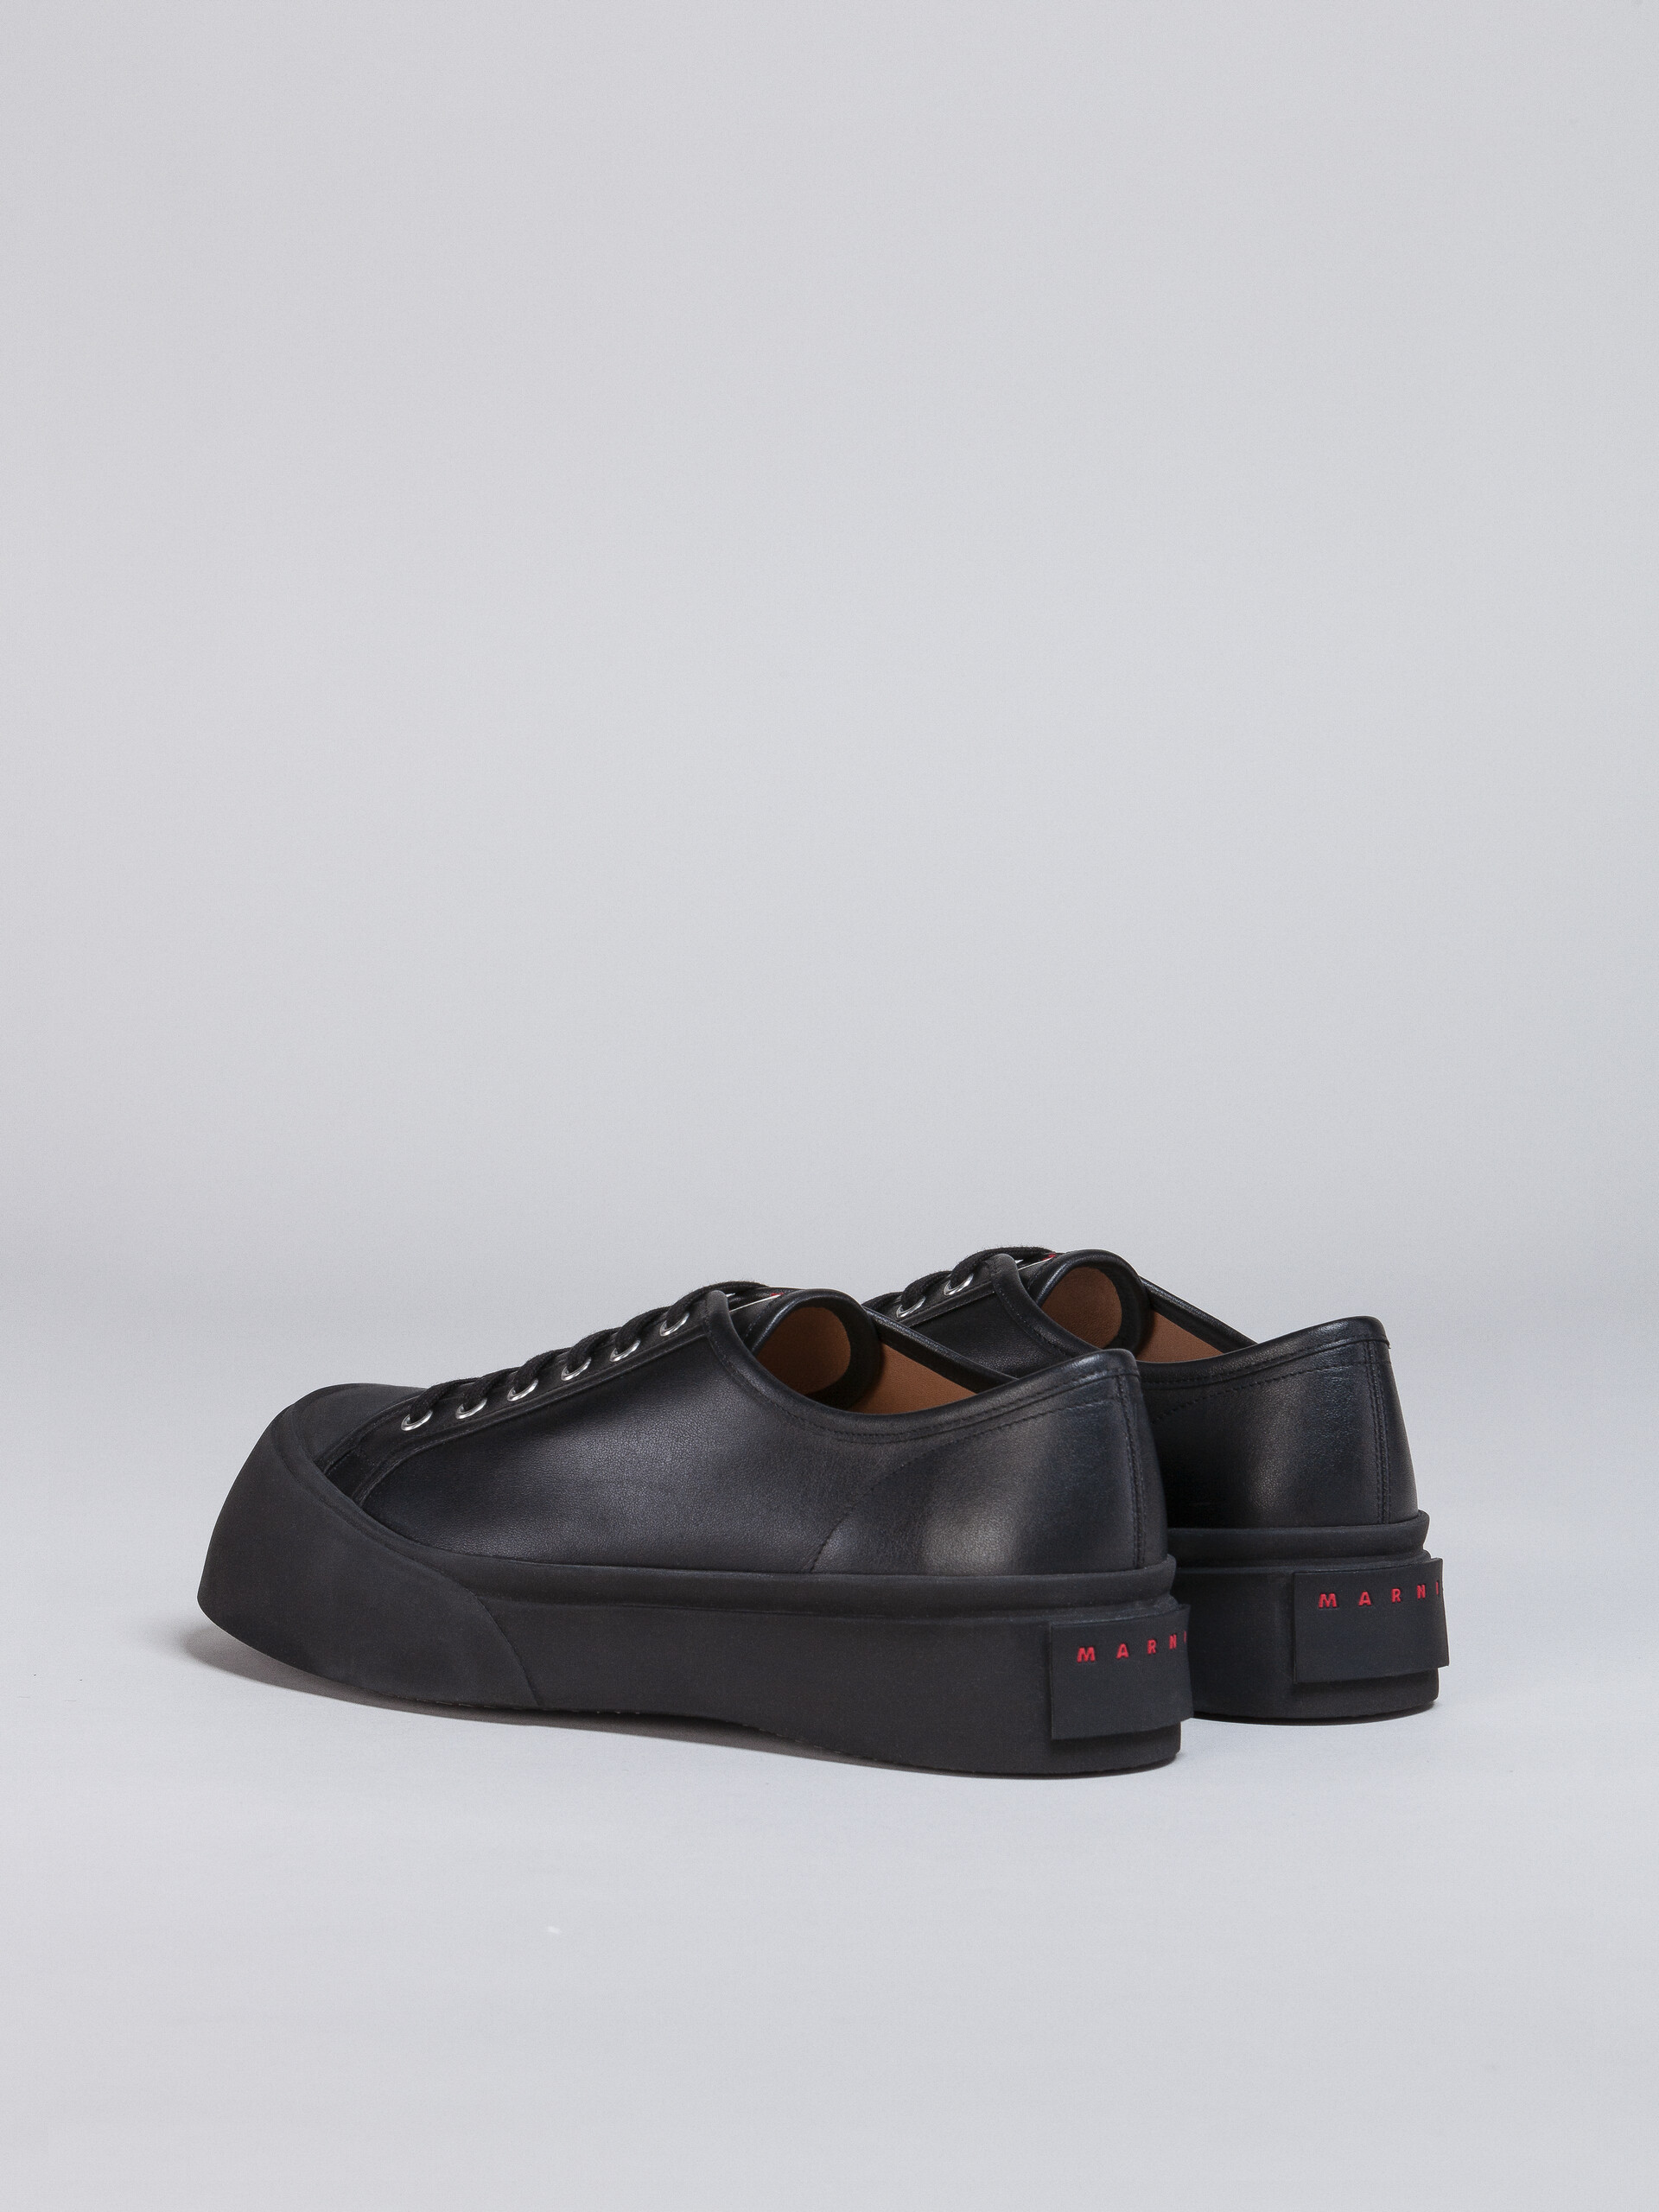 Soft calf leather PABLO sneaker - Sneakers - Image 3